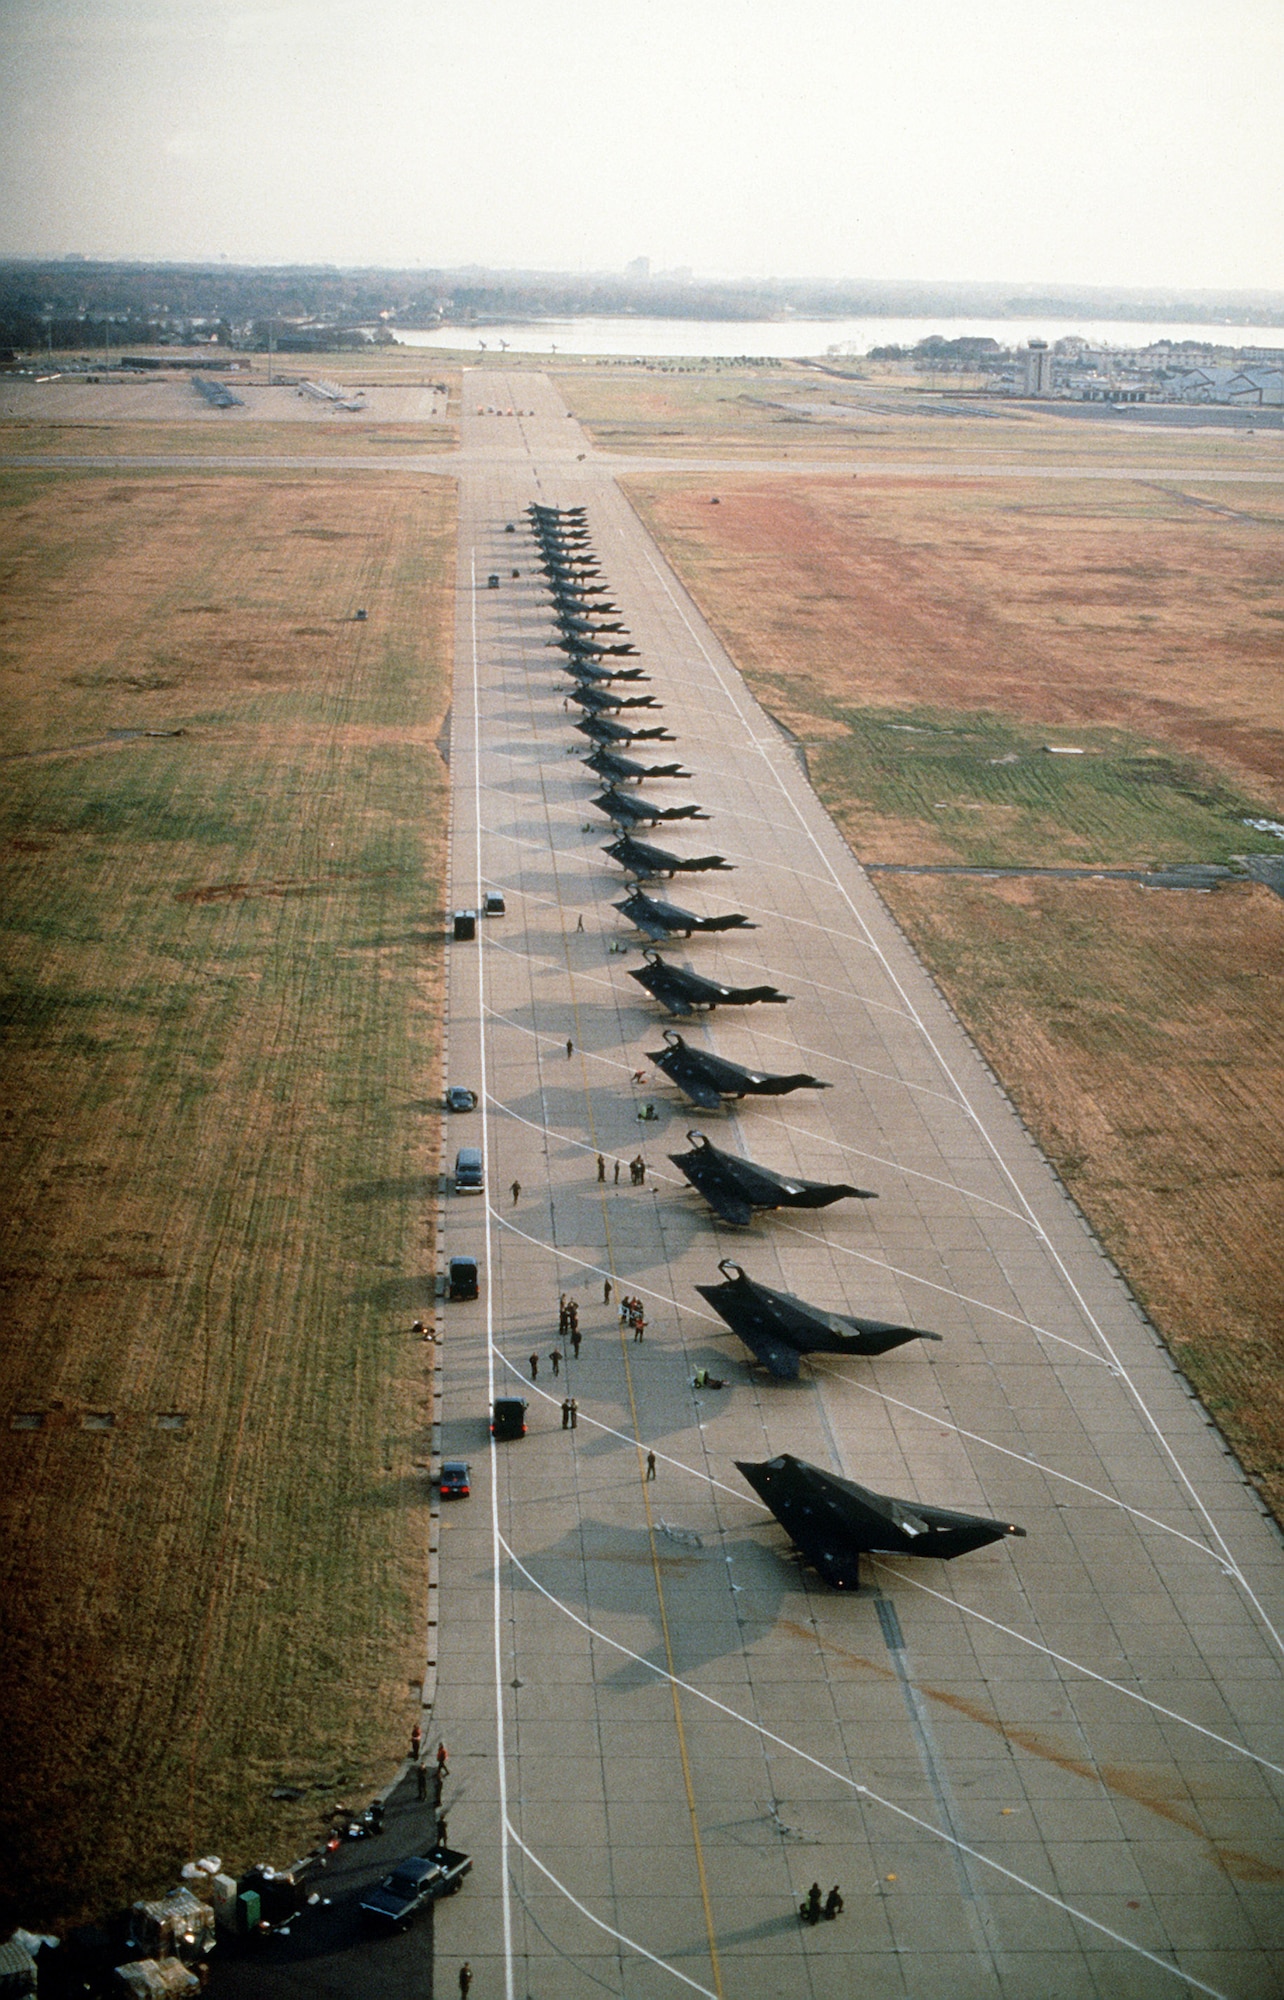 U.S. Air Force F-117A Nighthawk stealth fighter aircraft from the 37th Tactical Fighter Wing, Tonopah Test Range, Nevada, line the runway while deploying to Saudi Arabia during Operation Desert Shield. (U.S. Air Force Courtesy Photo)